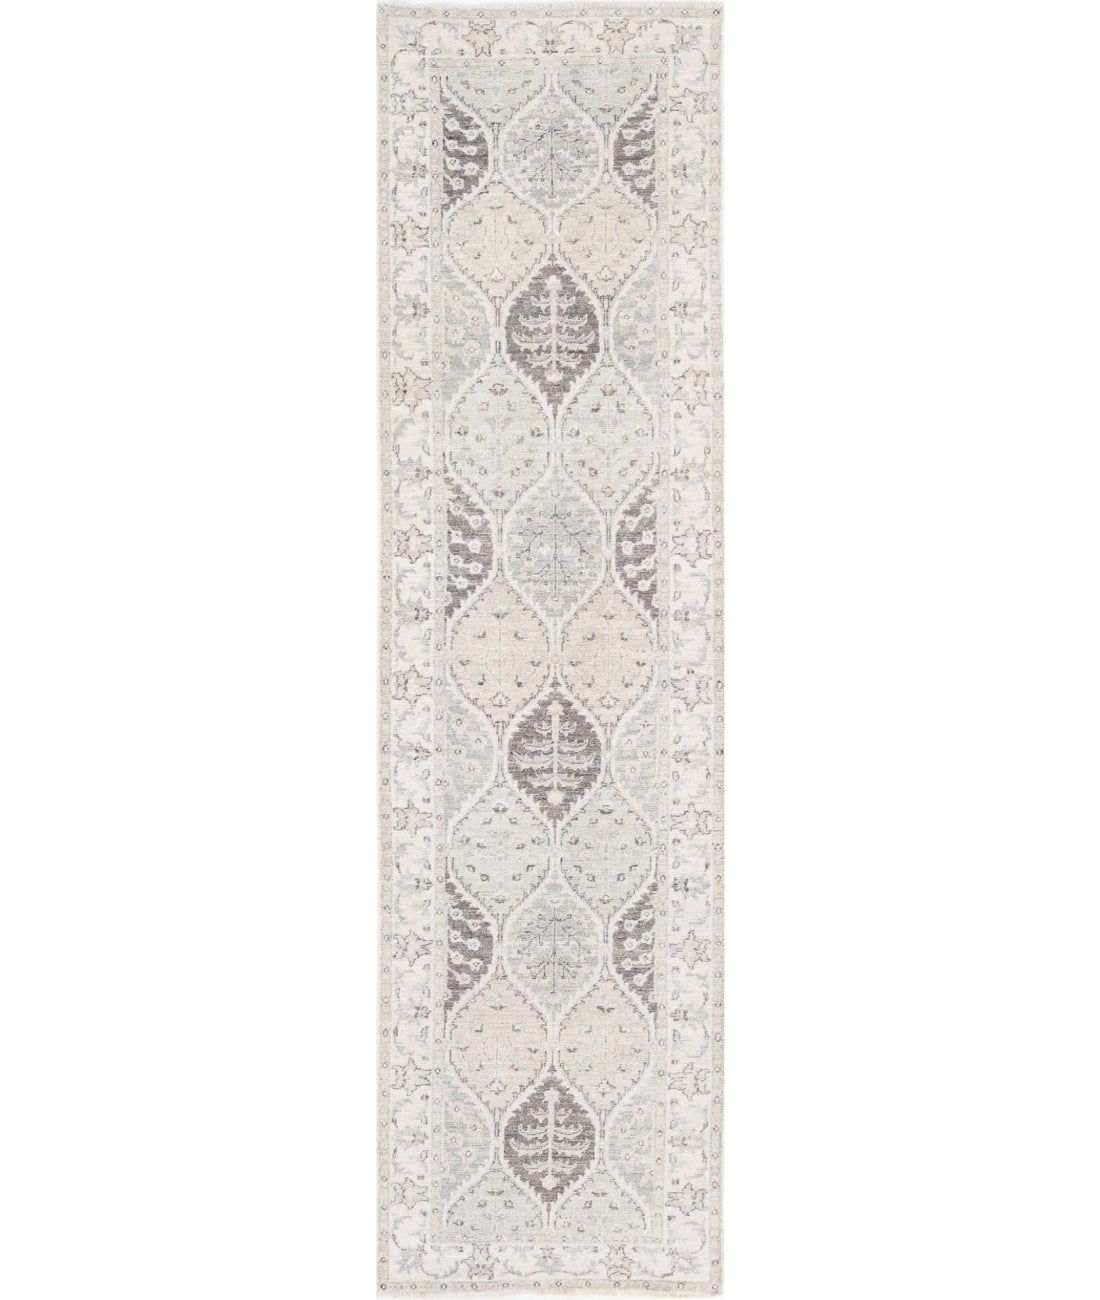 Hand Knotted Serenity Wool Rug - 2&#39;6&#39;&#39; x 9&#39;5&#39;&#39; 2&#39;6&#39;&#39; x 9&#39;5&#39;&#39; (75 X 283) / Grey / Ivory